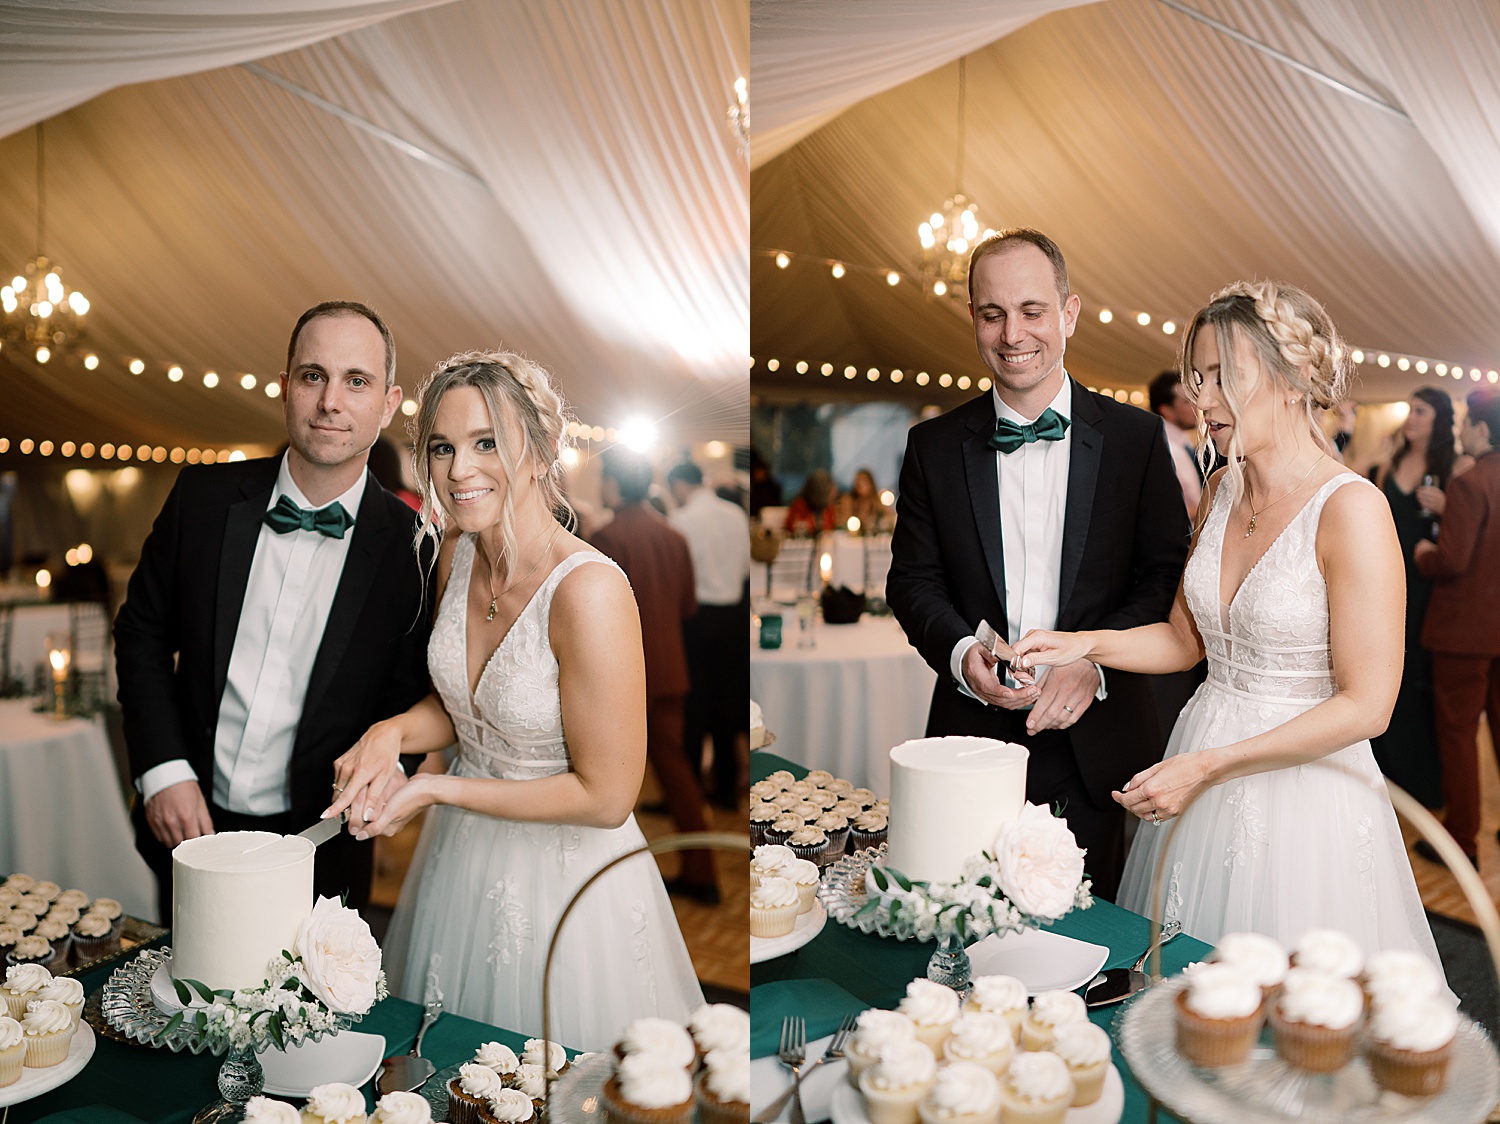 cake cutting at wedding reception under white tent at the allenberry with white roses